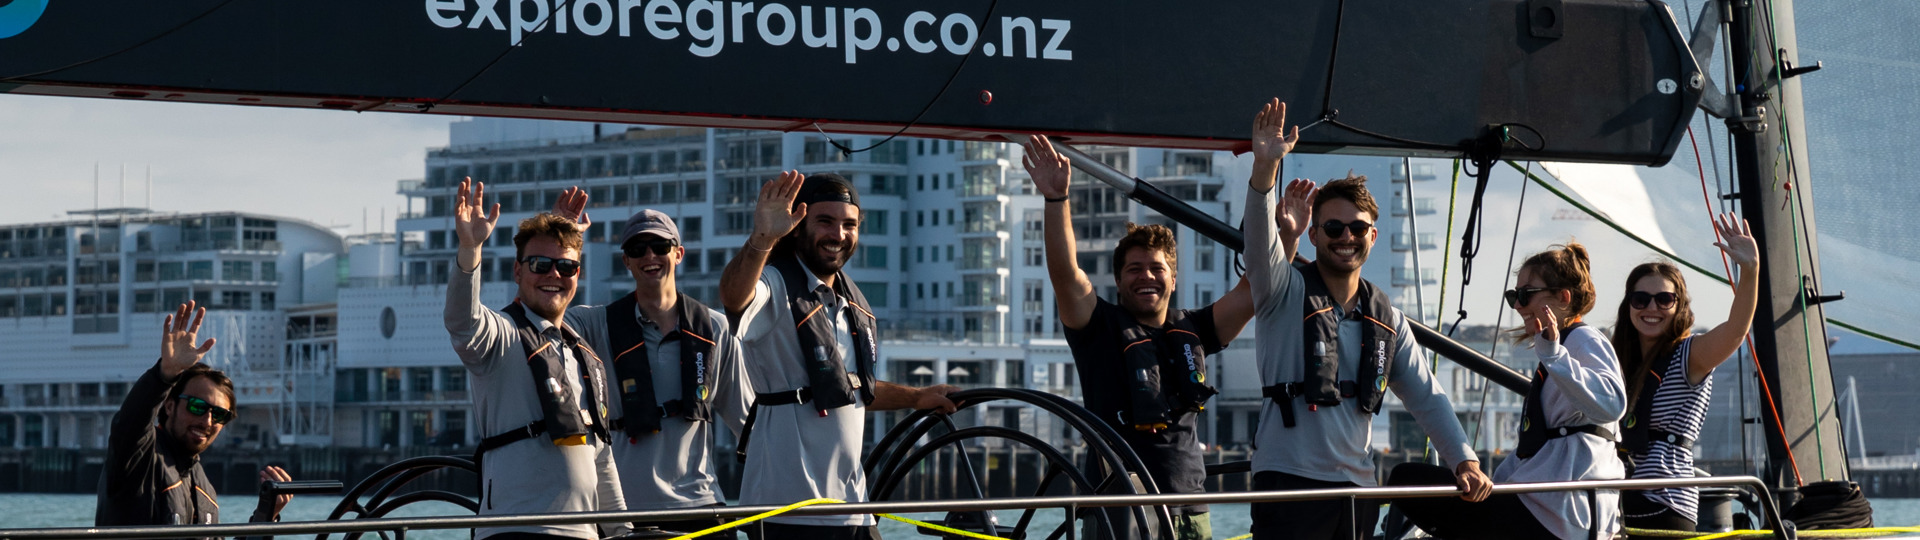 friendly Explore crew and passengers on an America's Cup Sailing yacht